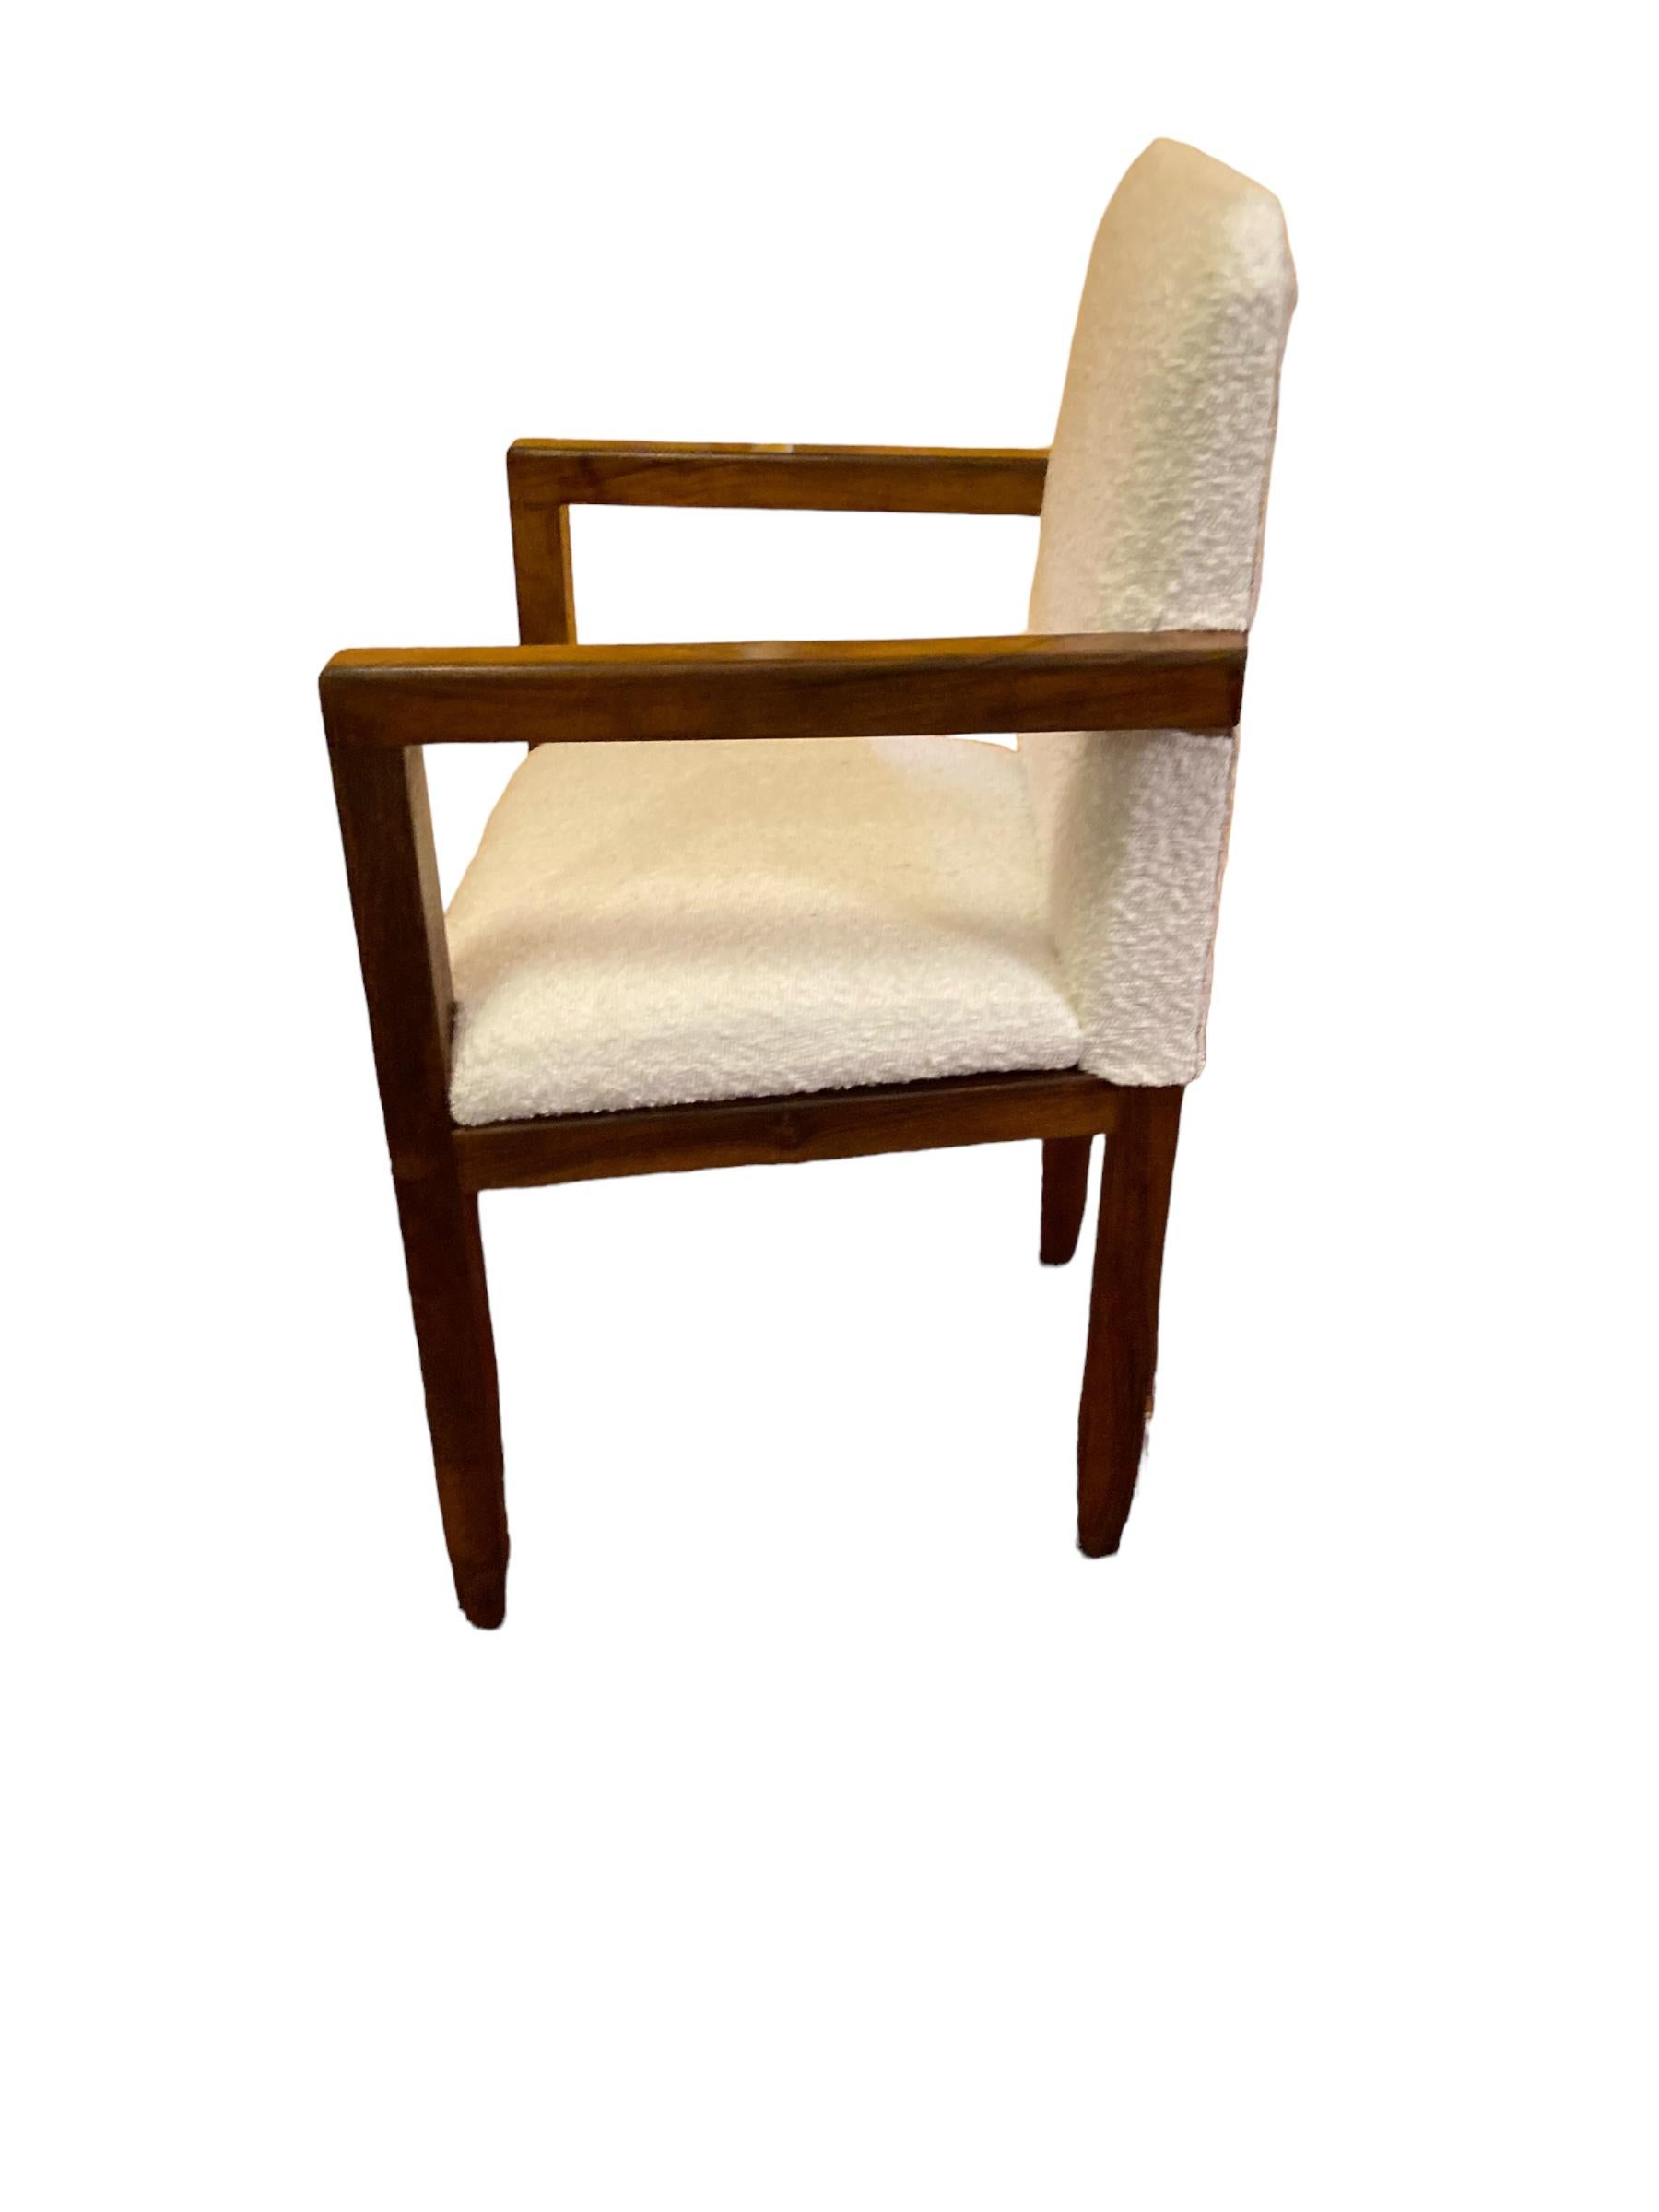 A Pair of Art Deco Mahogany framed Armchairs, White Boucle Upholstery 1920's For Sale 4